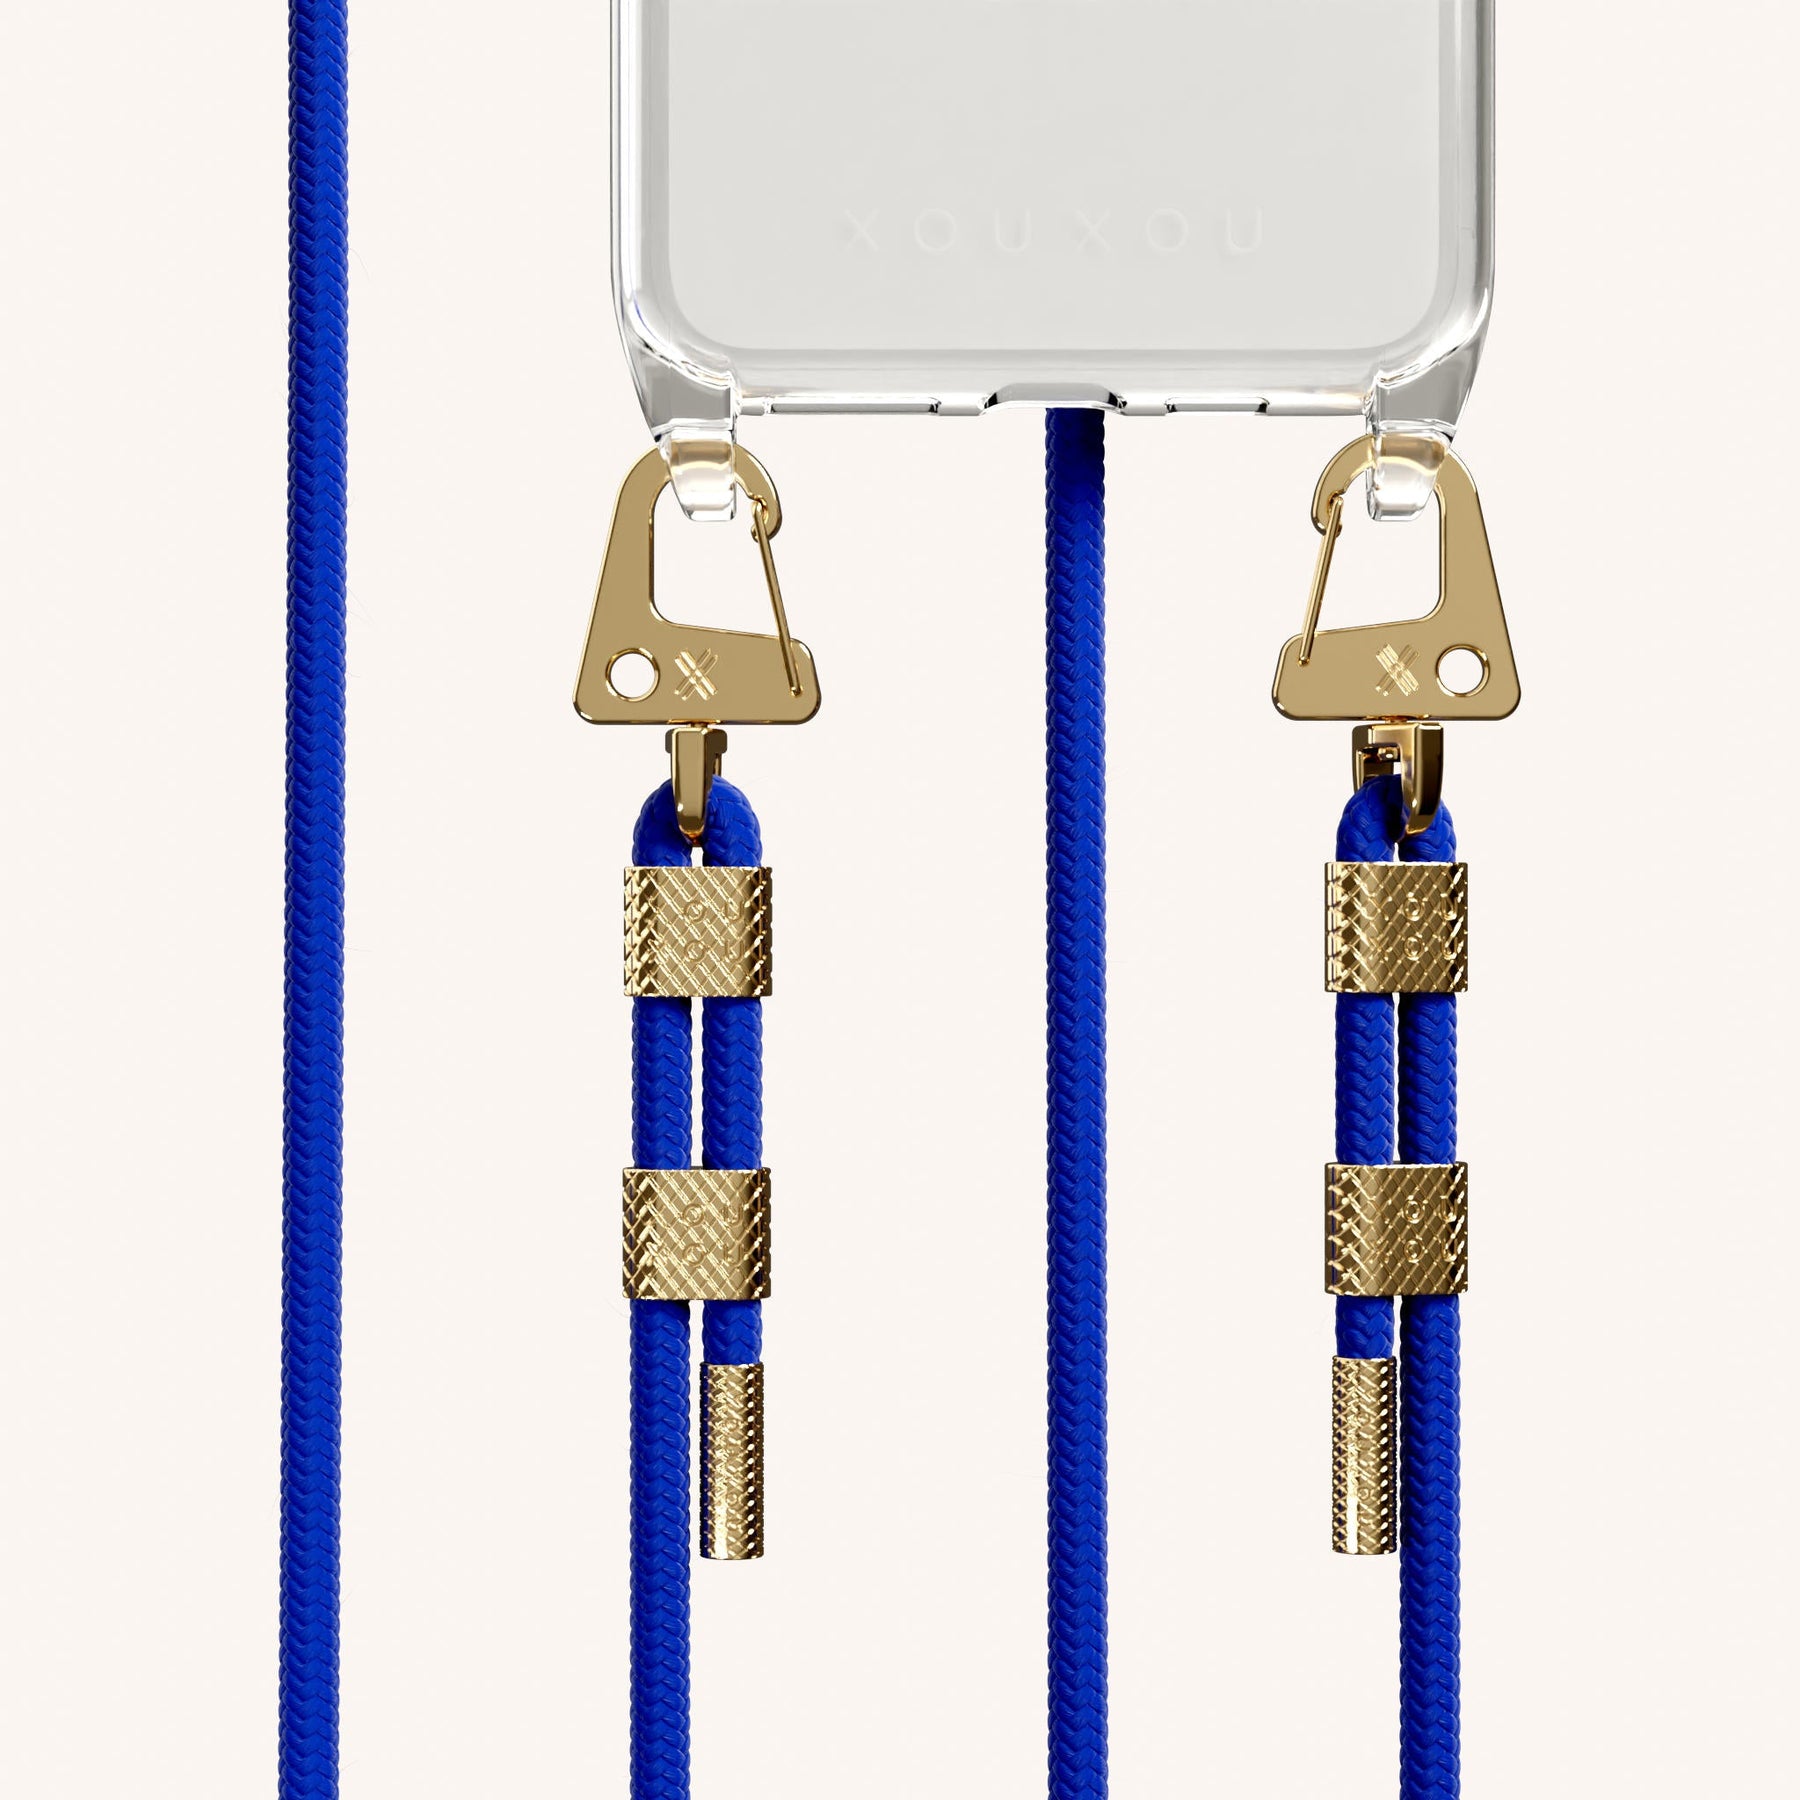 Phone Necklace with Carabiner Rope in Clear + Blue